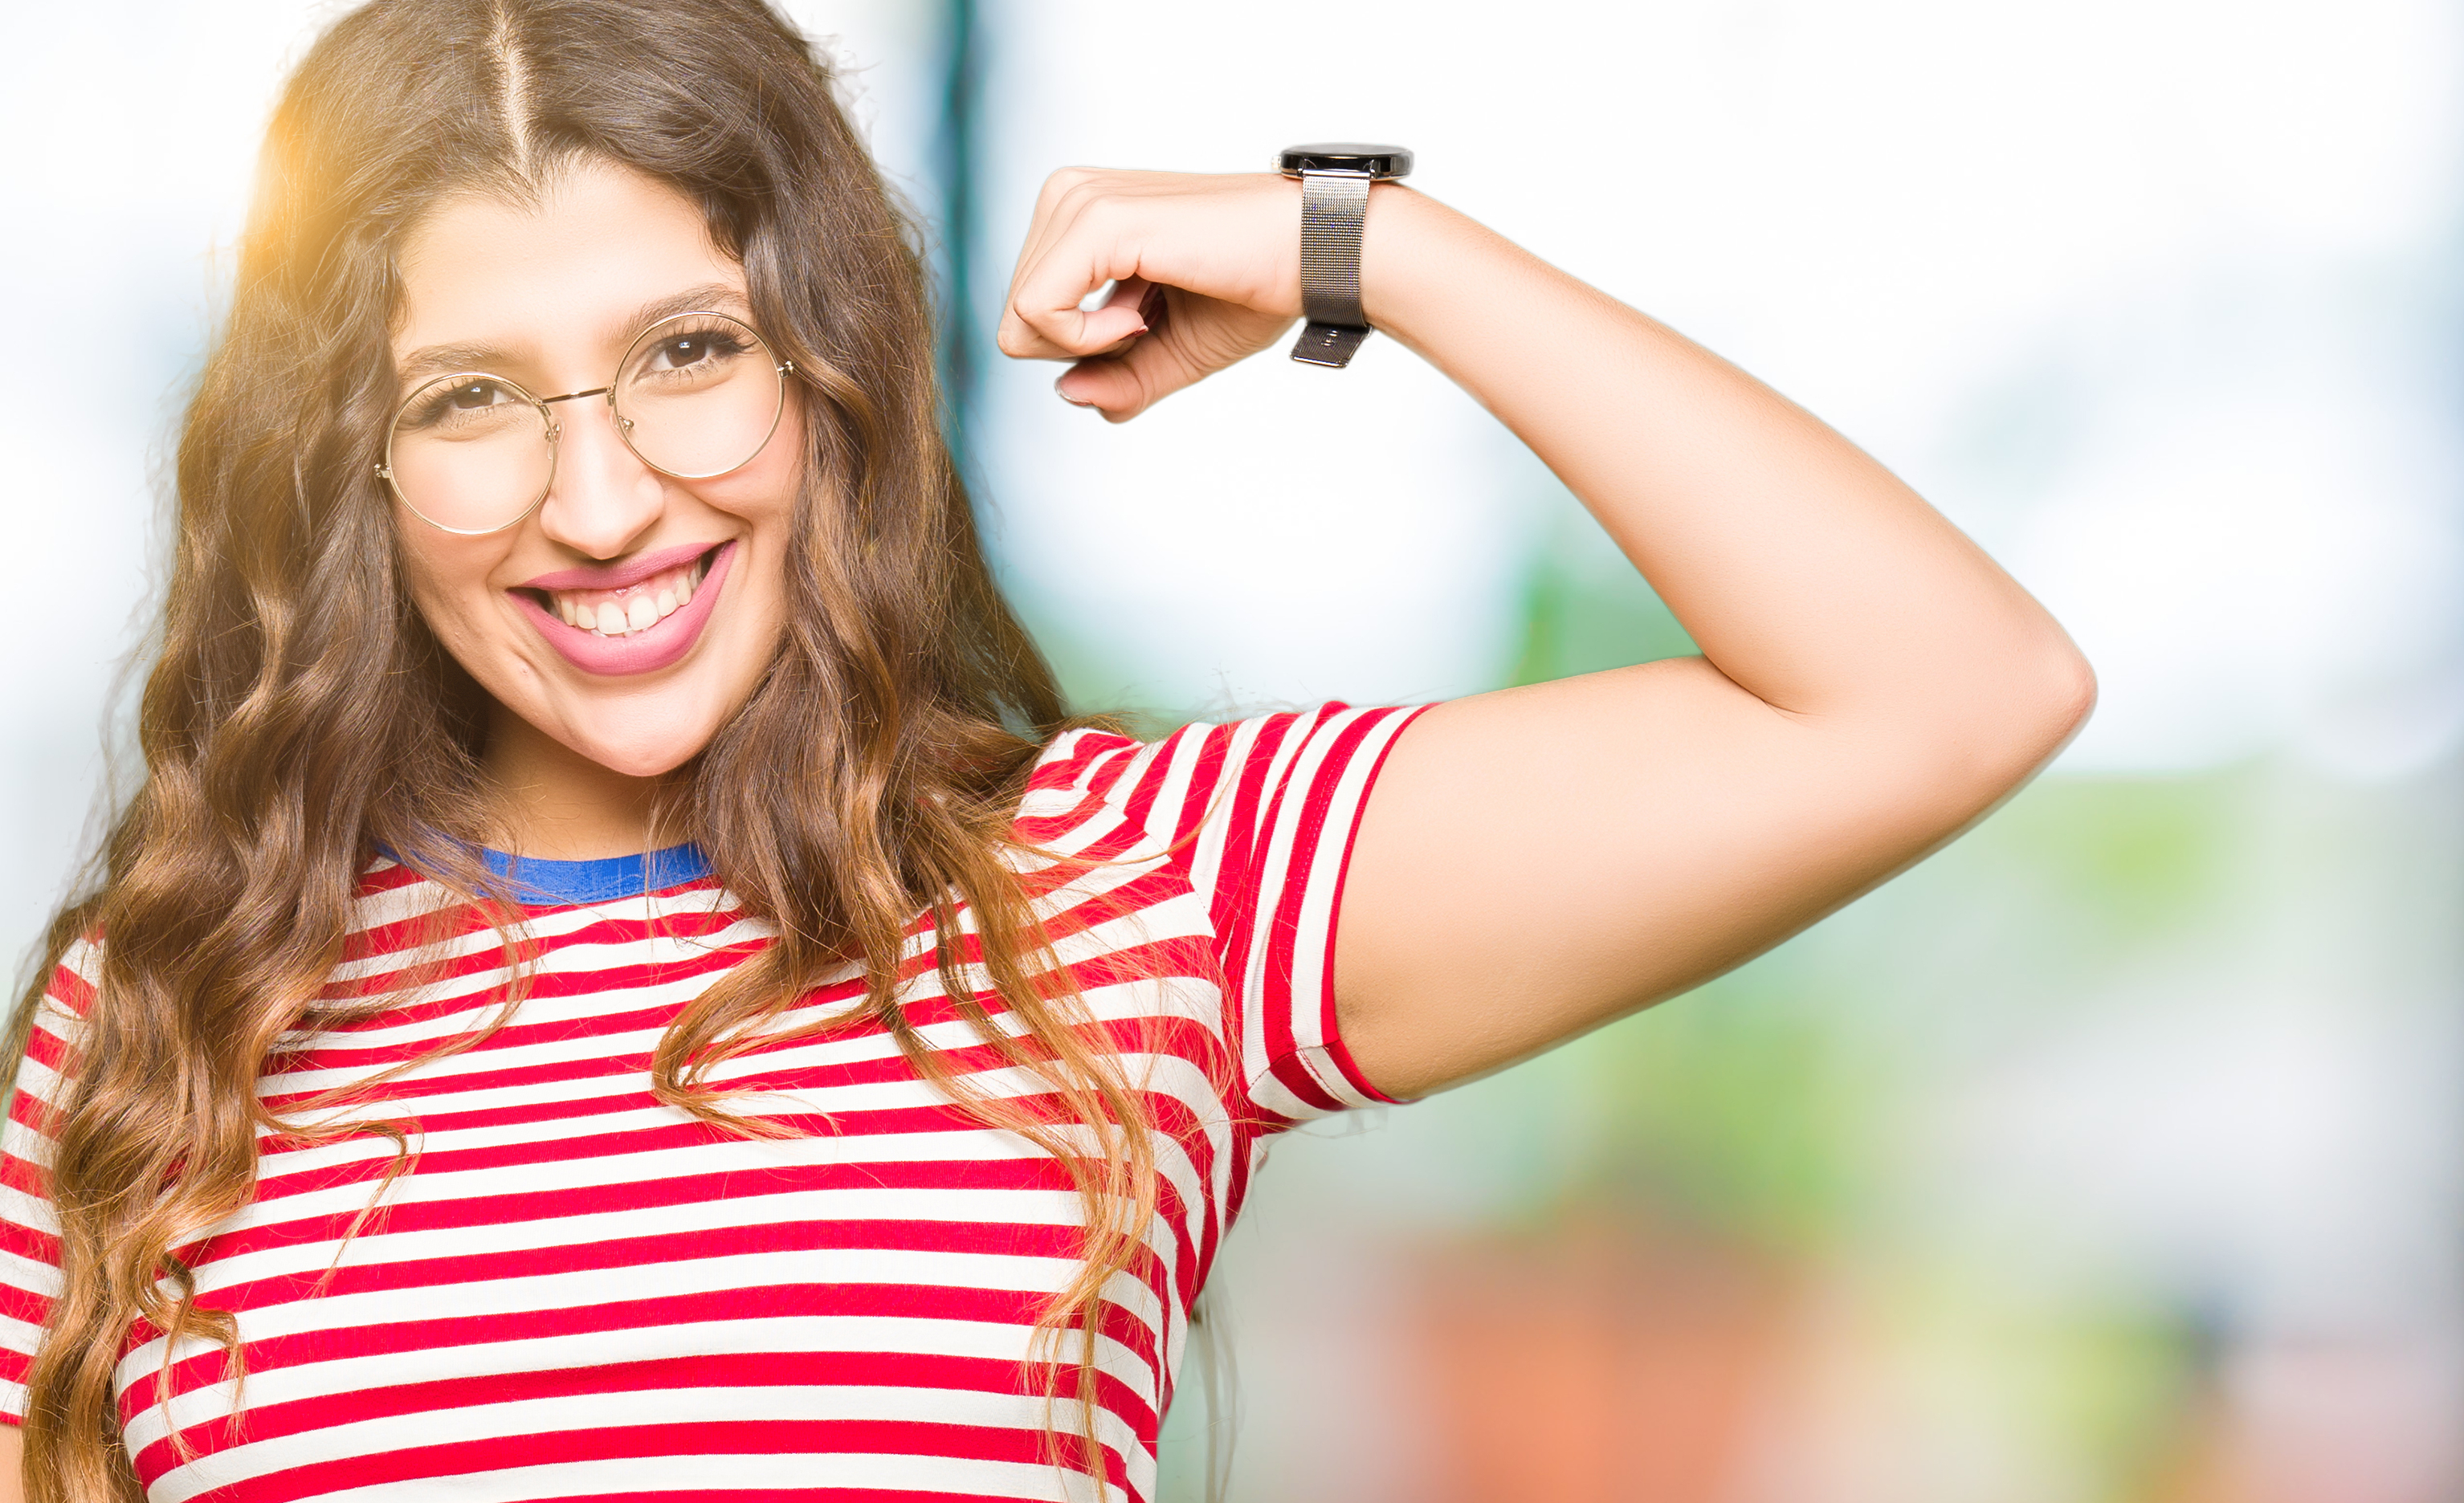 heloc vs home equity can be tricky this woman is flexing her bicep because having home equity it powerful.